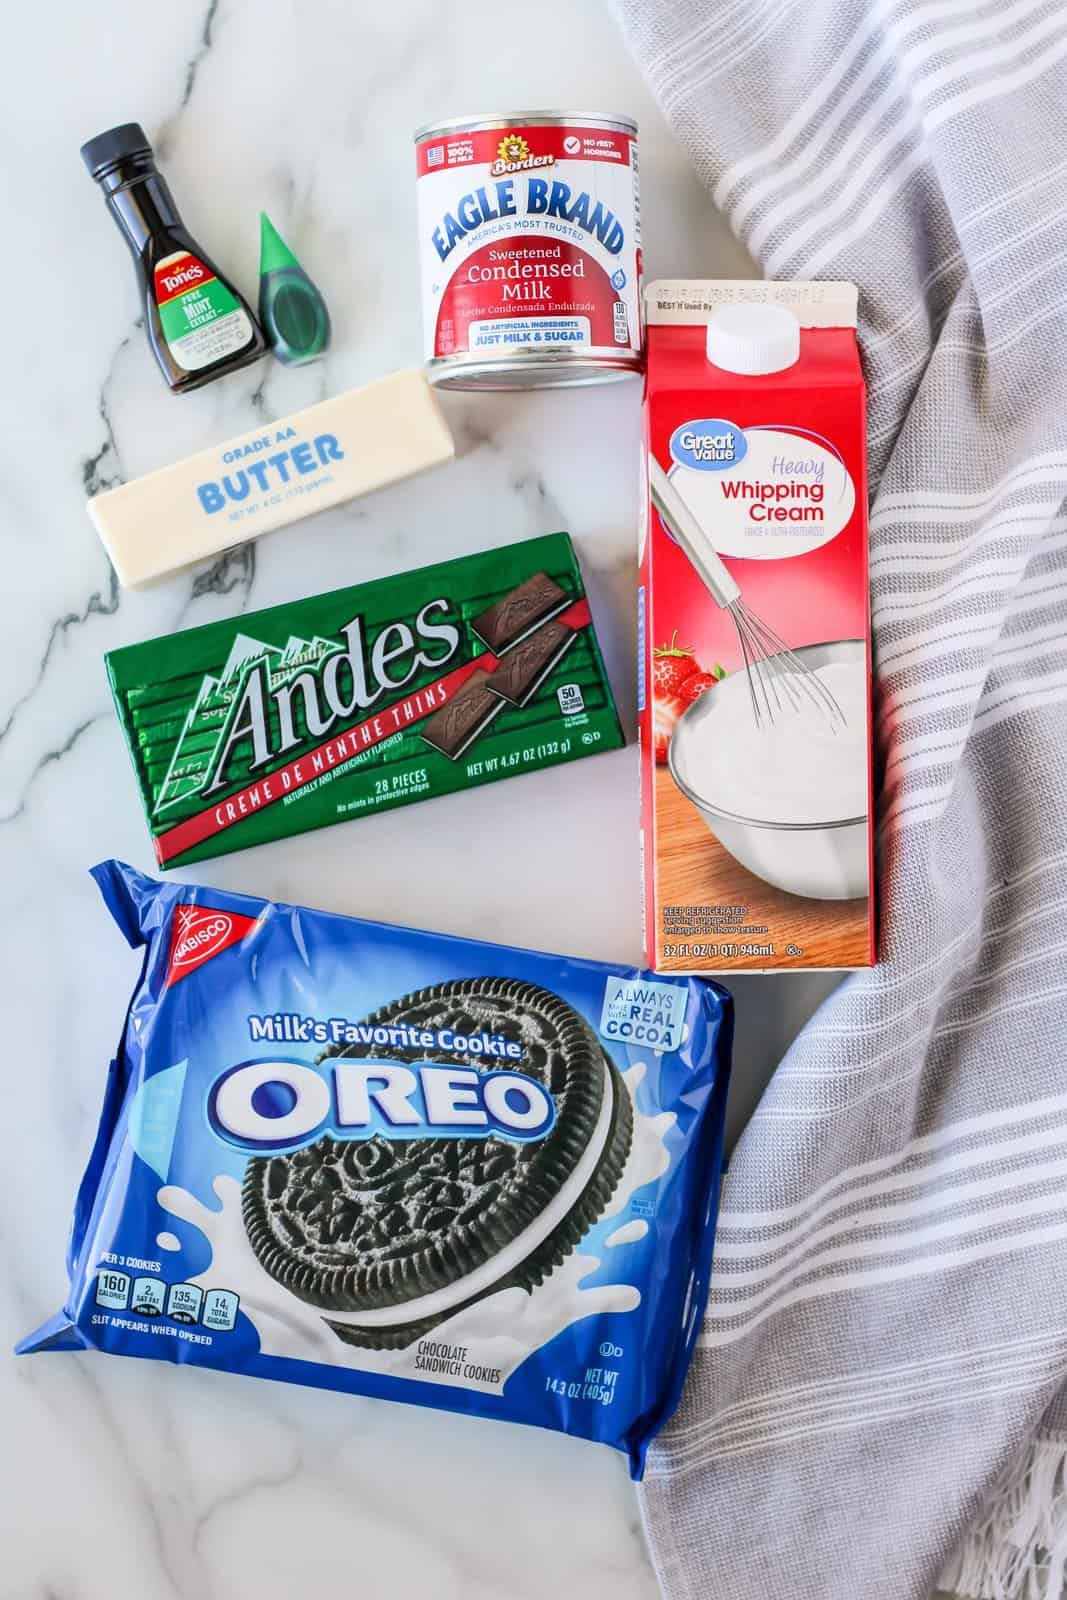 Ingredients needed:unsalted butter, sandwich cookies, heavy whipping cream, sweetened condensed milk, mint extract, green food coloring (optional), chopped mint chocolate.